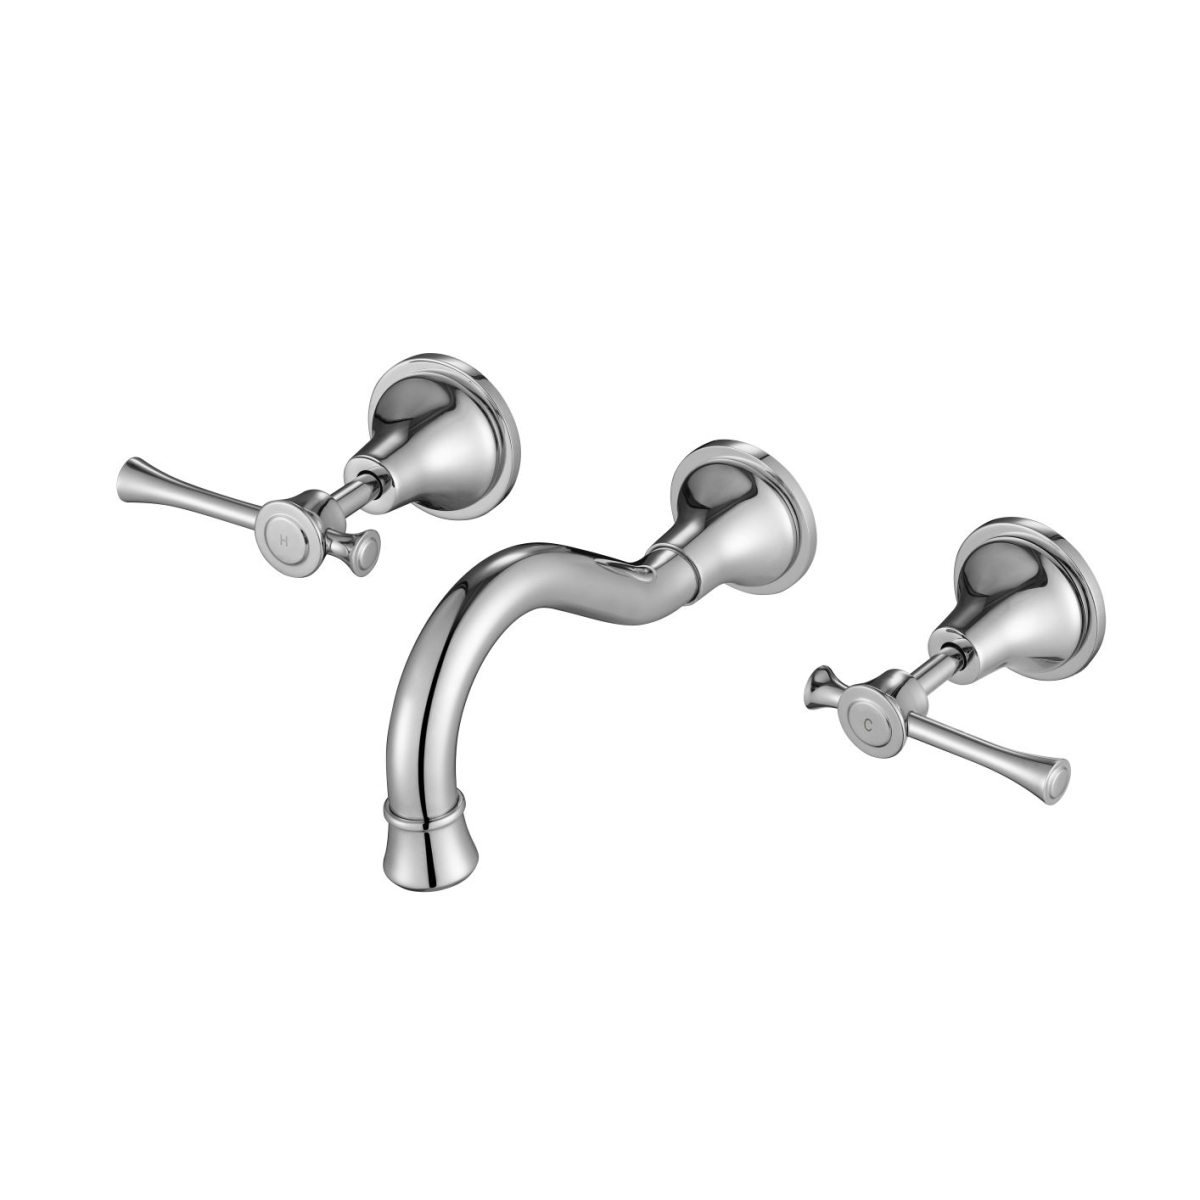 Montpellier Traditional Wall Taps & Spout Set Polished Chrome